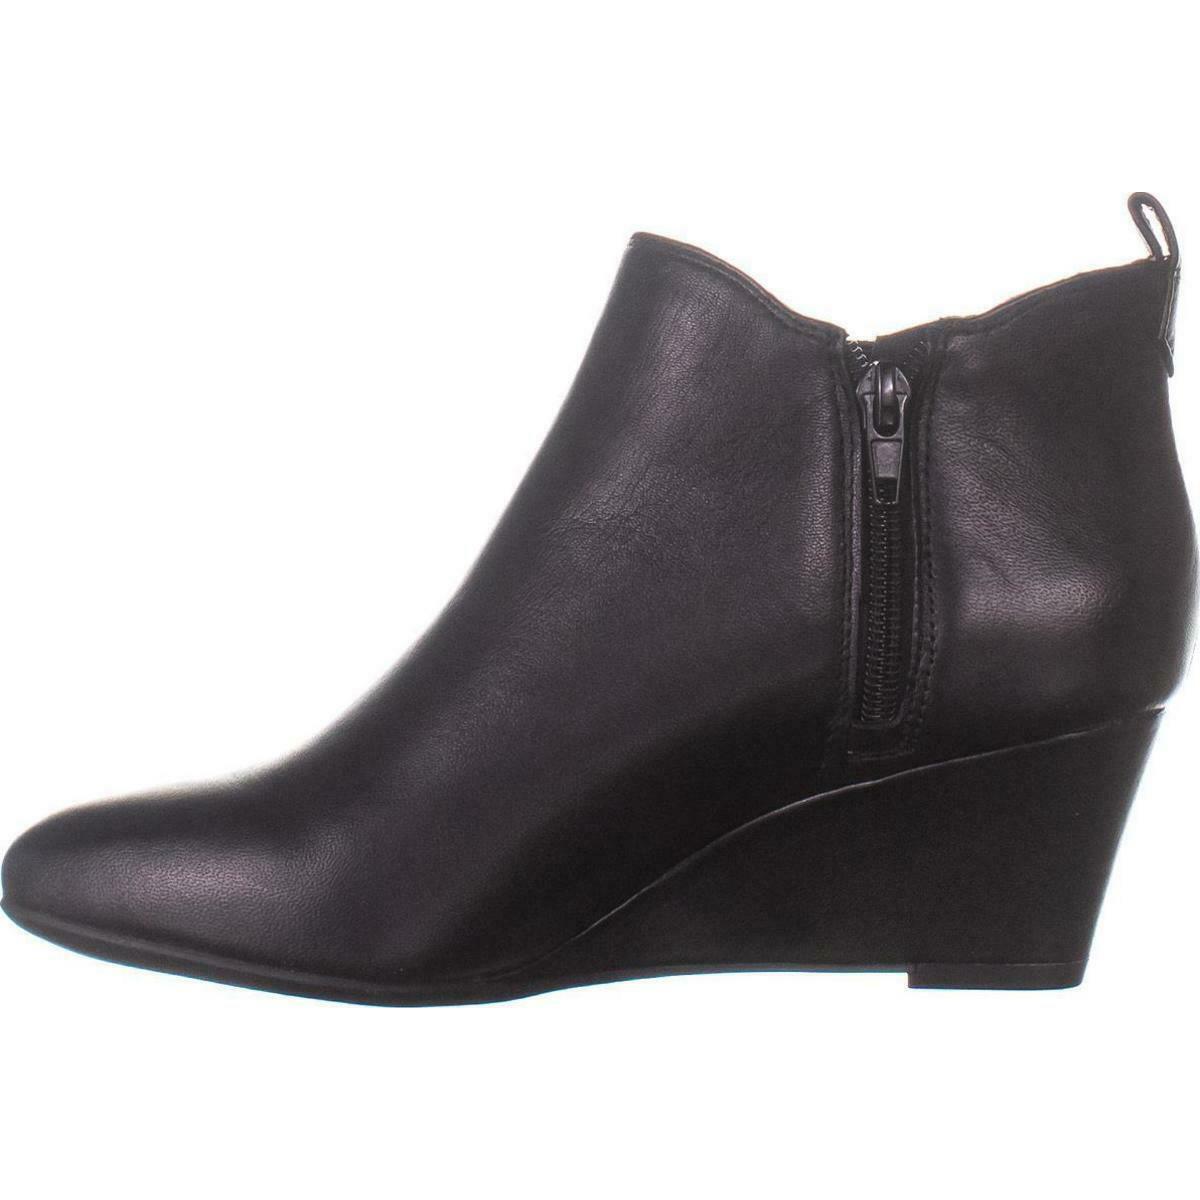 Anne Klein Abilene Pointed Toe Wedge Ankle Boots 459, Black, 5 US - Boots